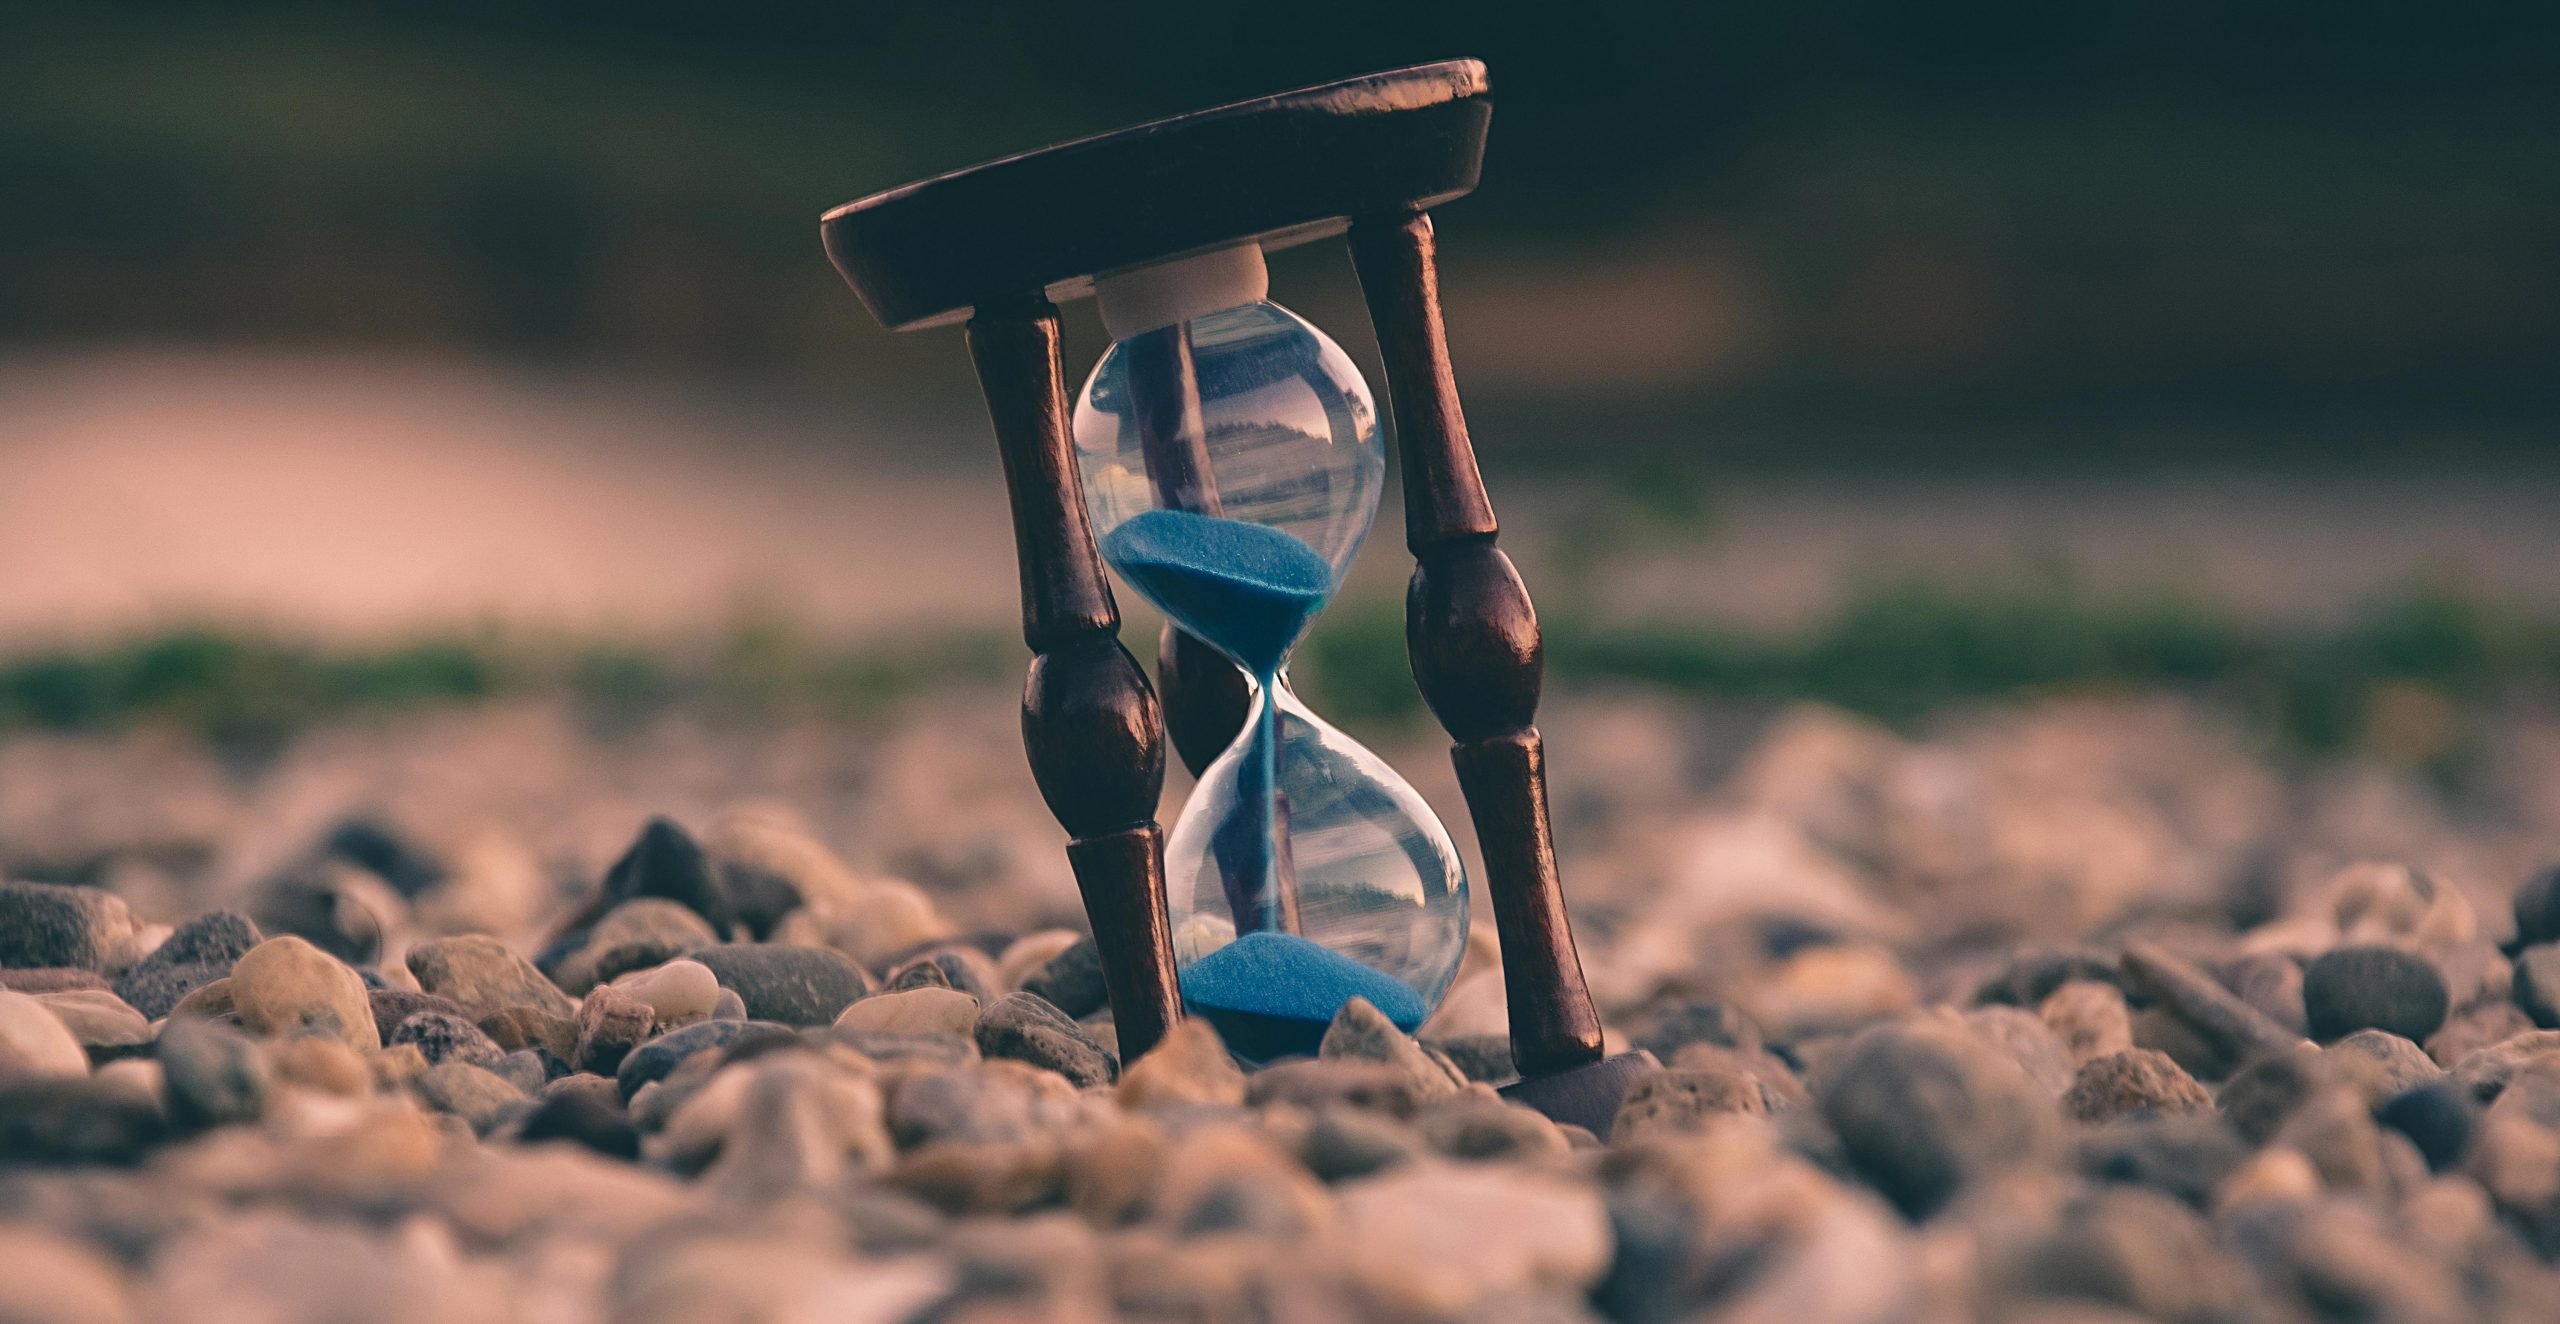 An hourglass with blue sand in it, perched on a pebble beach